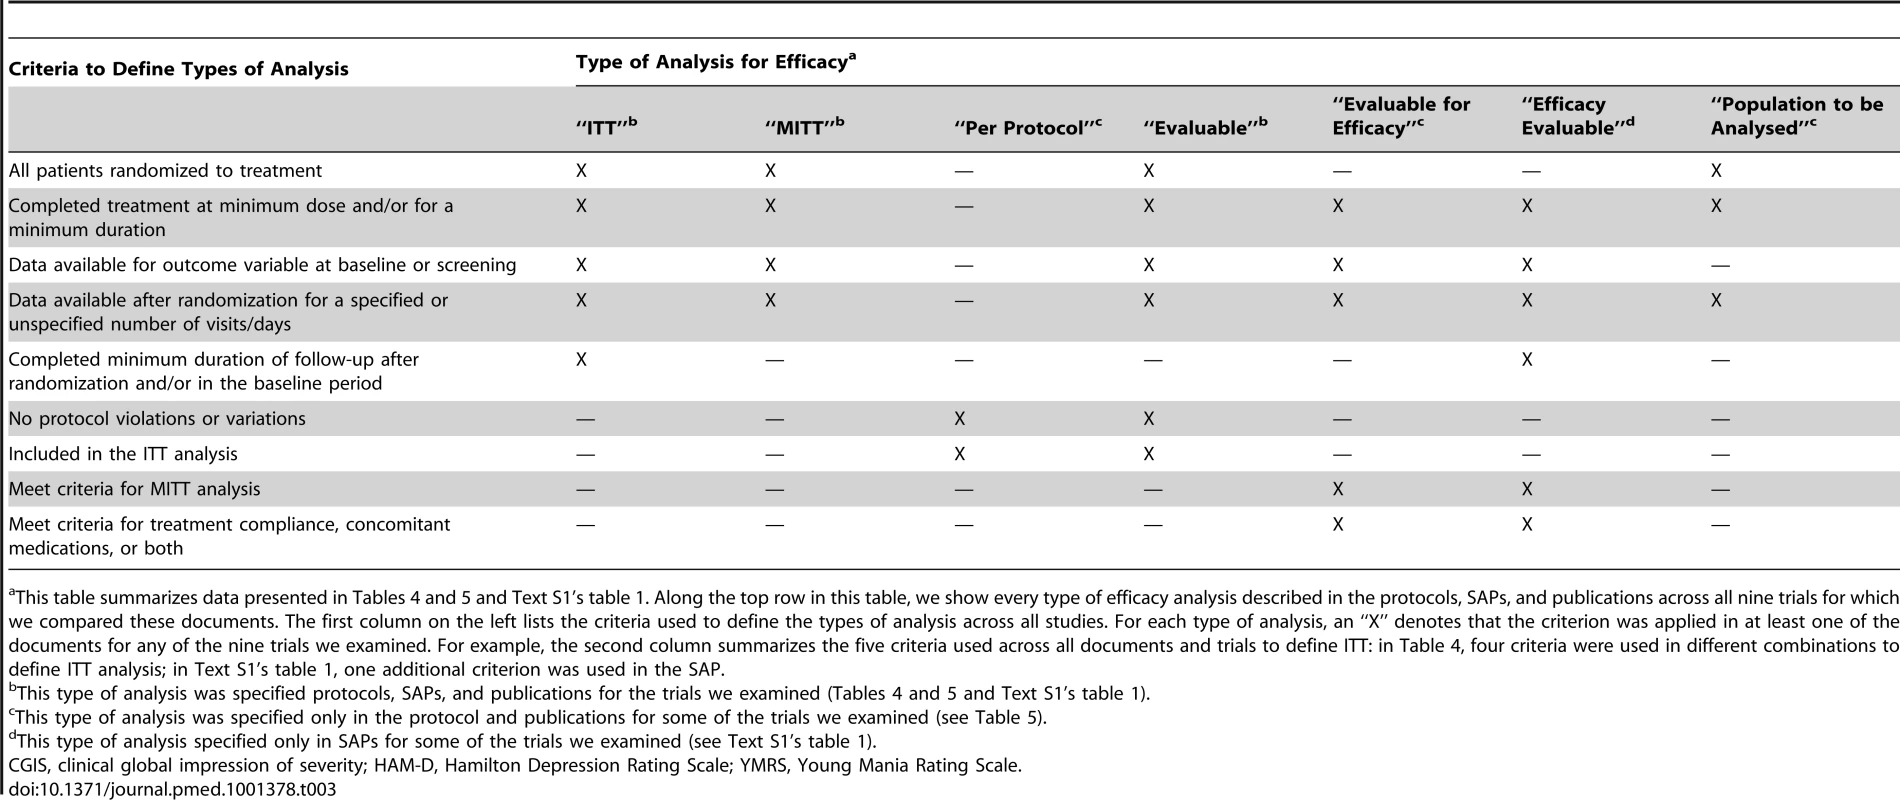 Summary of criteria used for including participants in seven types of analyses for efficacy as described in protocols, statistical analysis plans, and publications across the nine included trials.